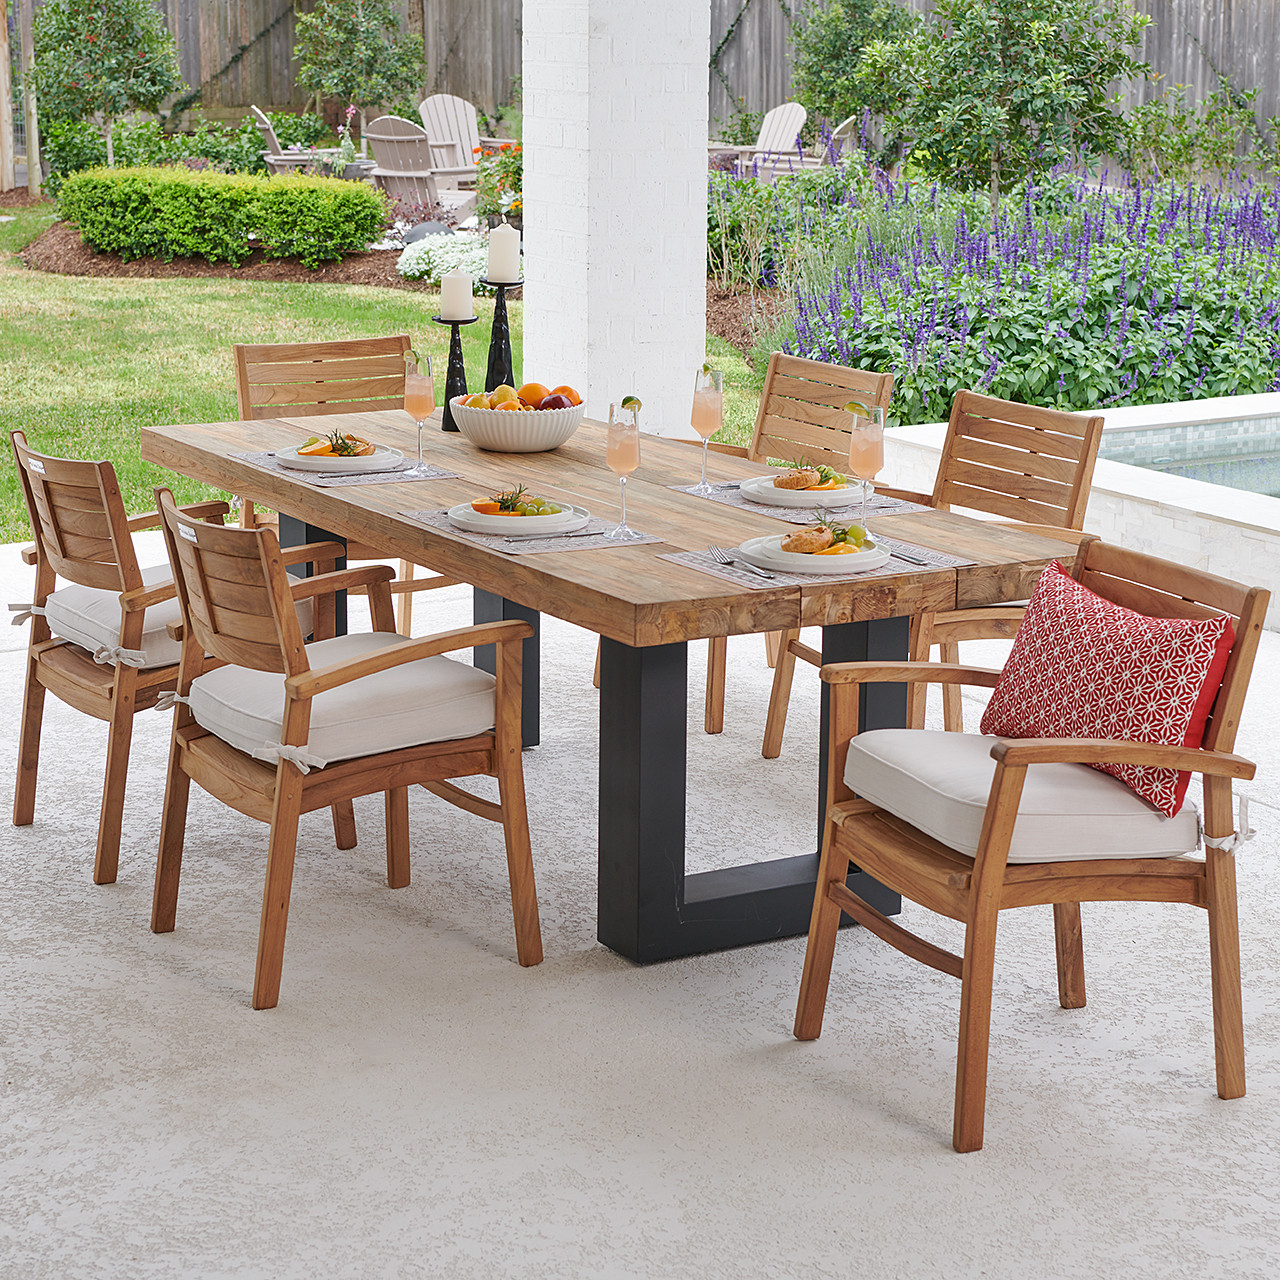 Warwick Teak with Cushions 7 Piece Dining Set + Balencia 84 x 40 in. Table